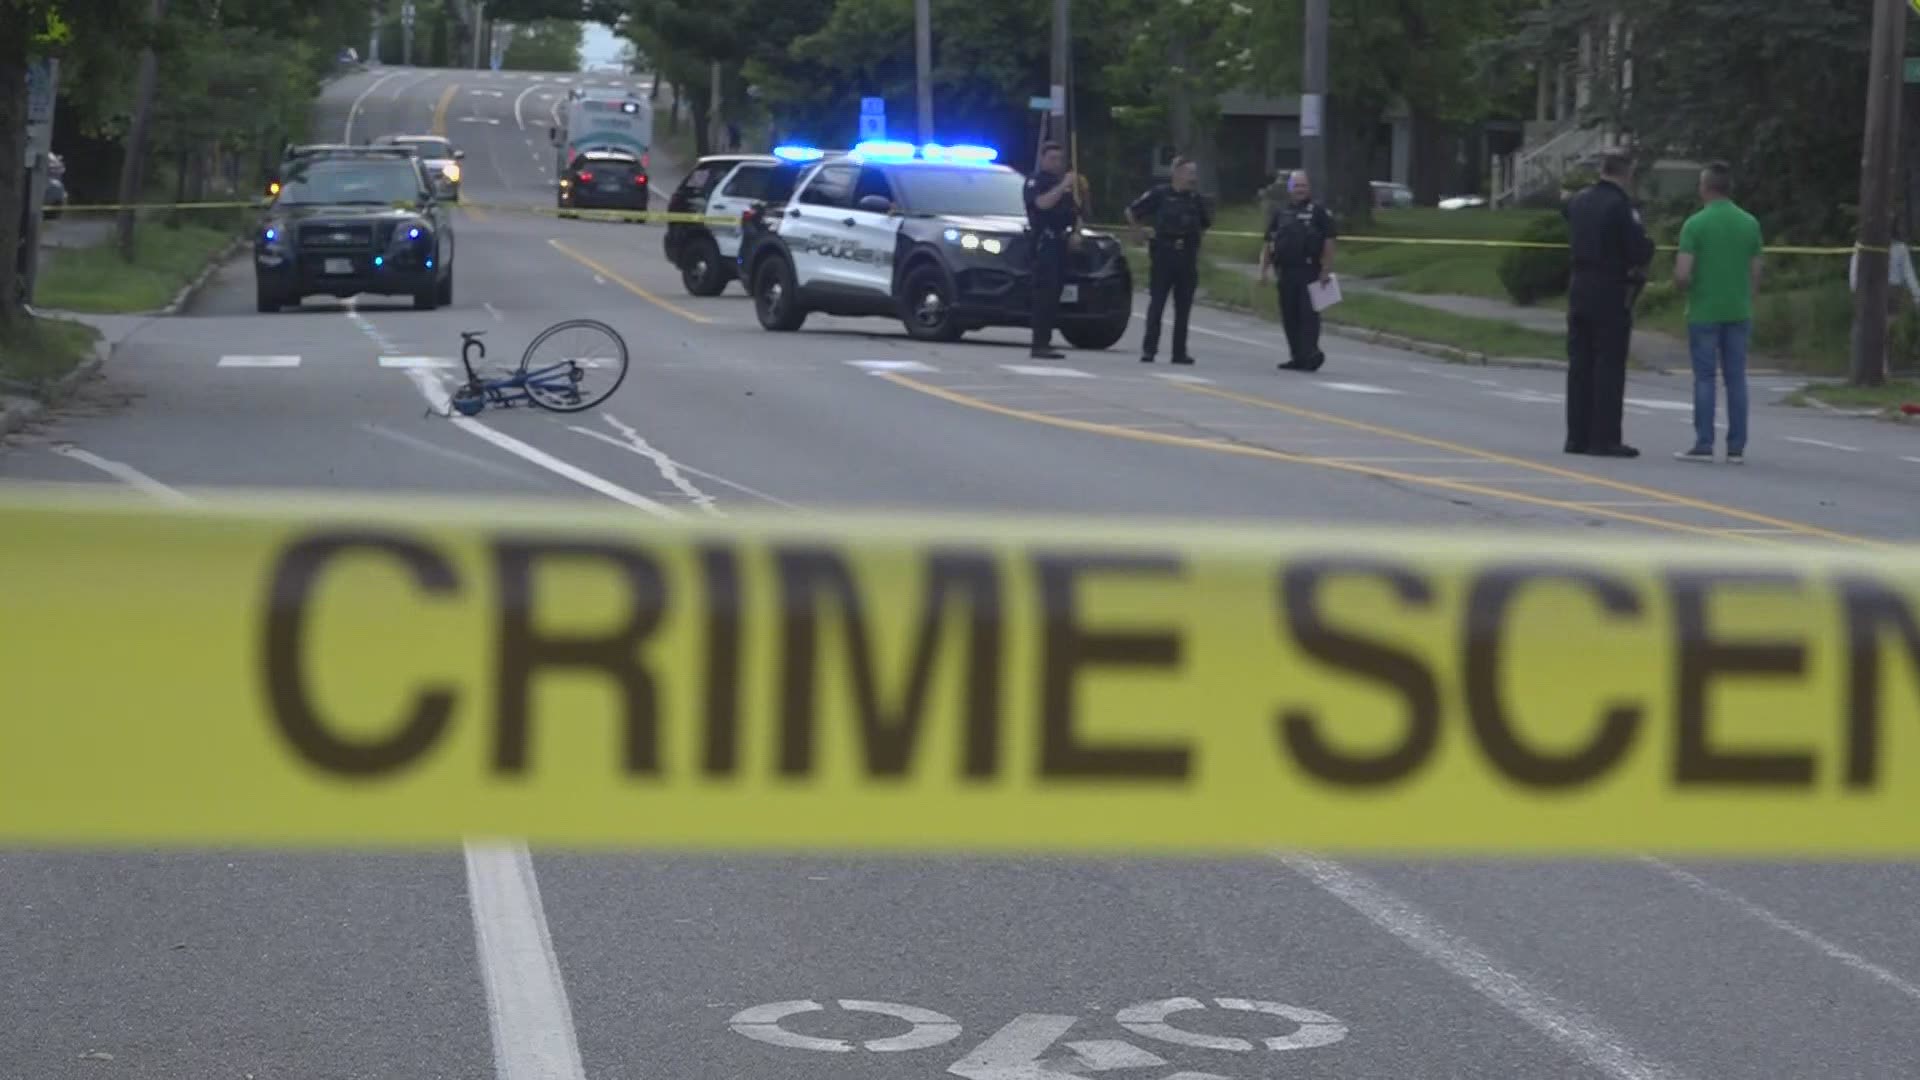 According to police, the cyclist was a 36 year-old Portland man; he suffered serious injuries and was taken to Maine Medical Center for treatment.